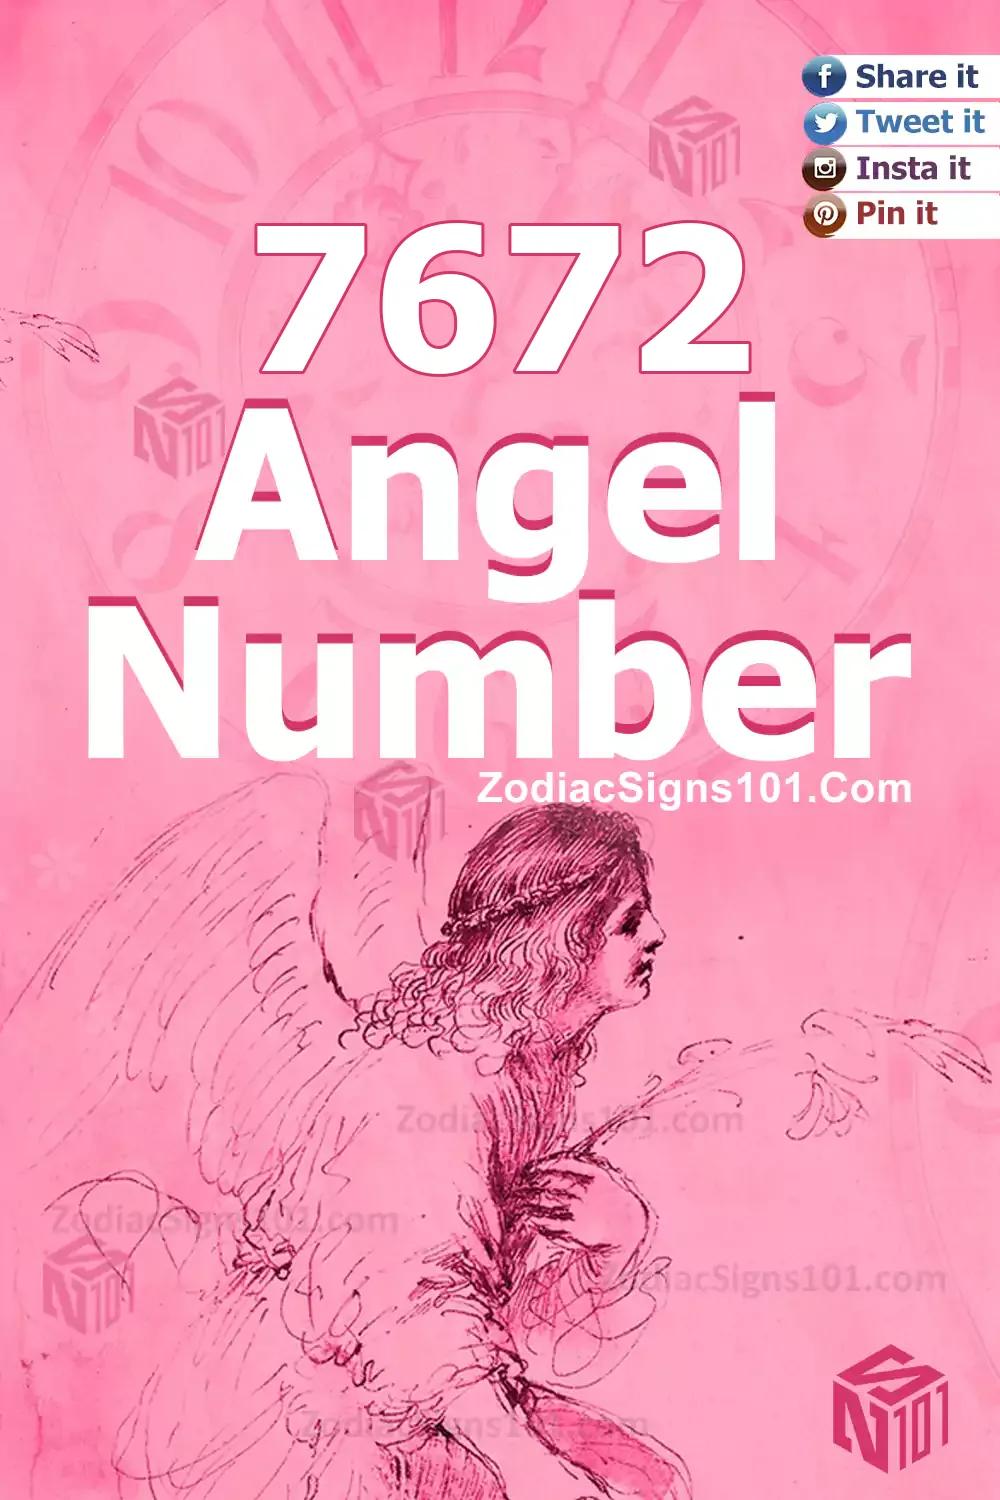 7672 Angel Number Meaning